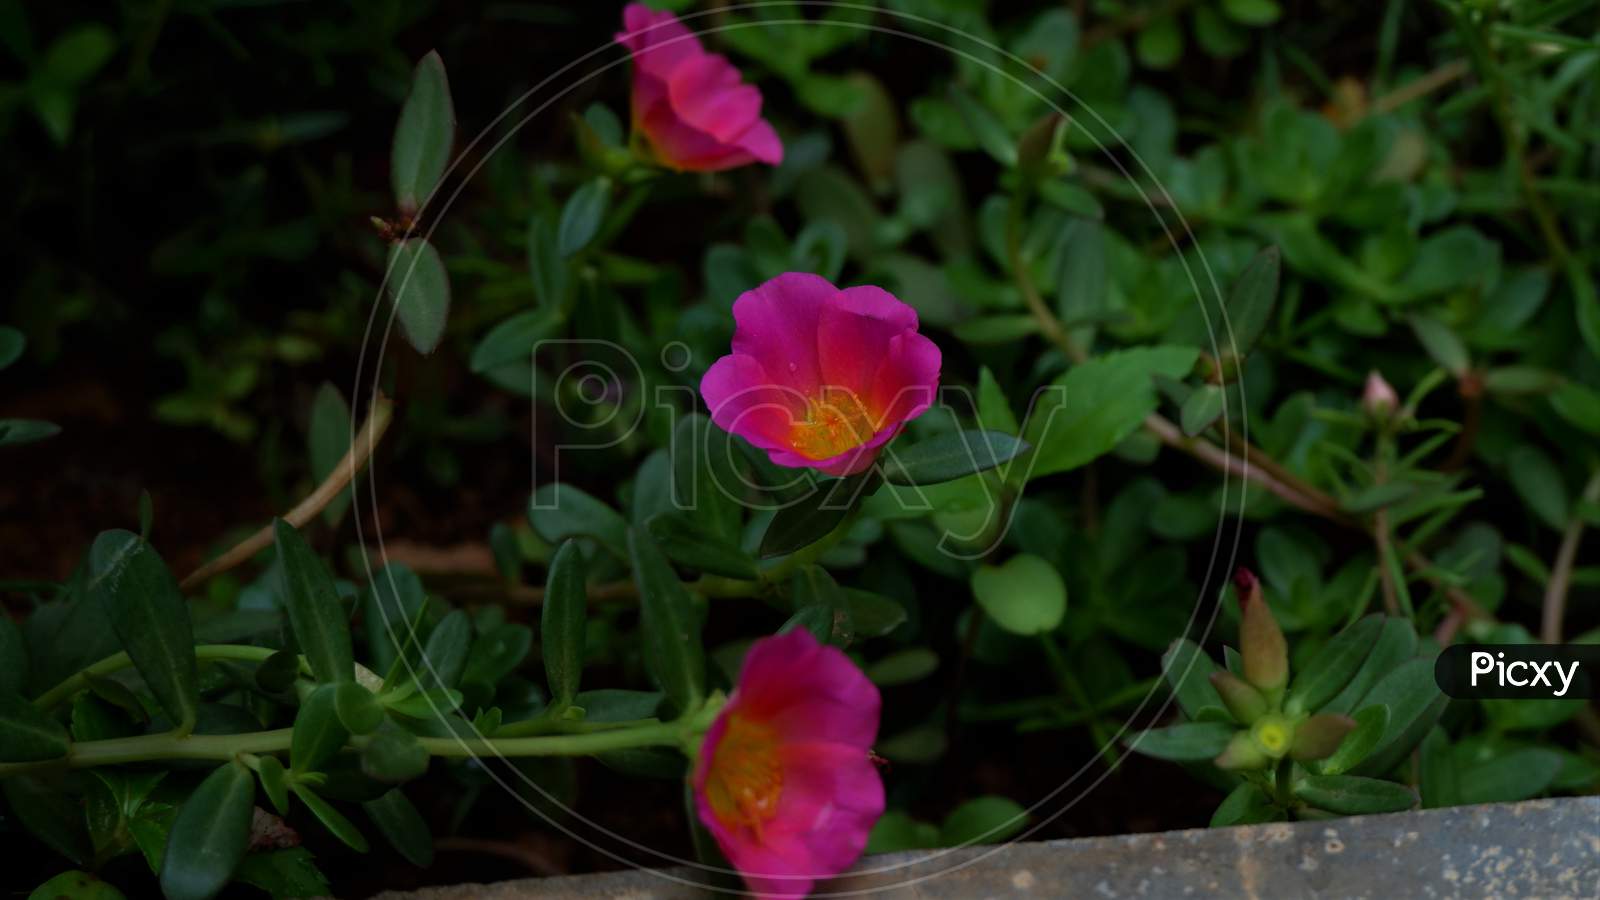 Image Of 10 O Clock Flowers In The Garden Pa Picxy